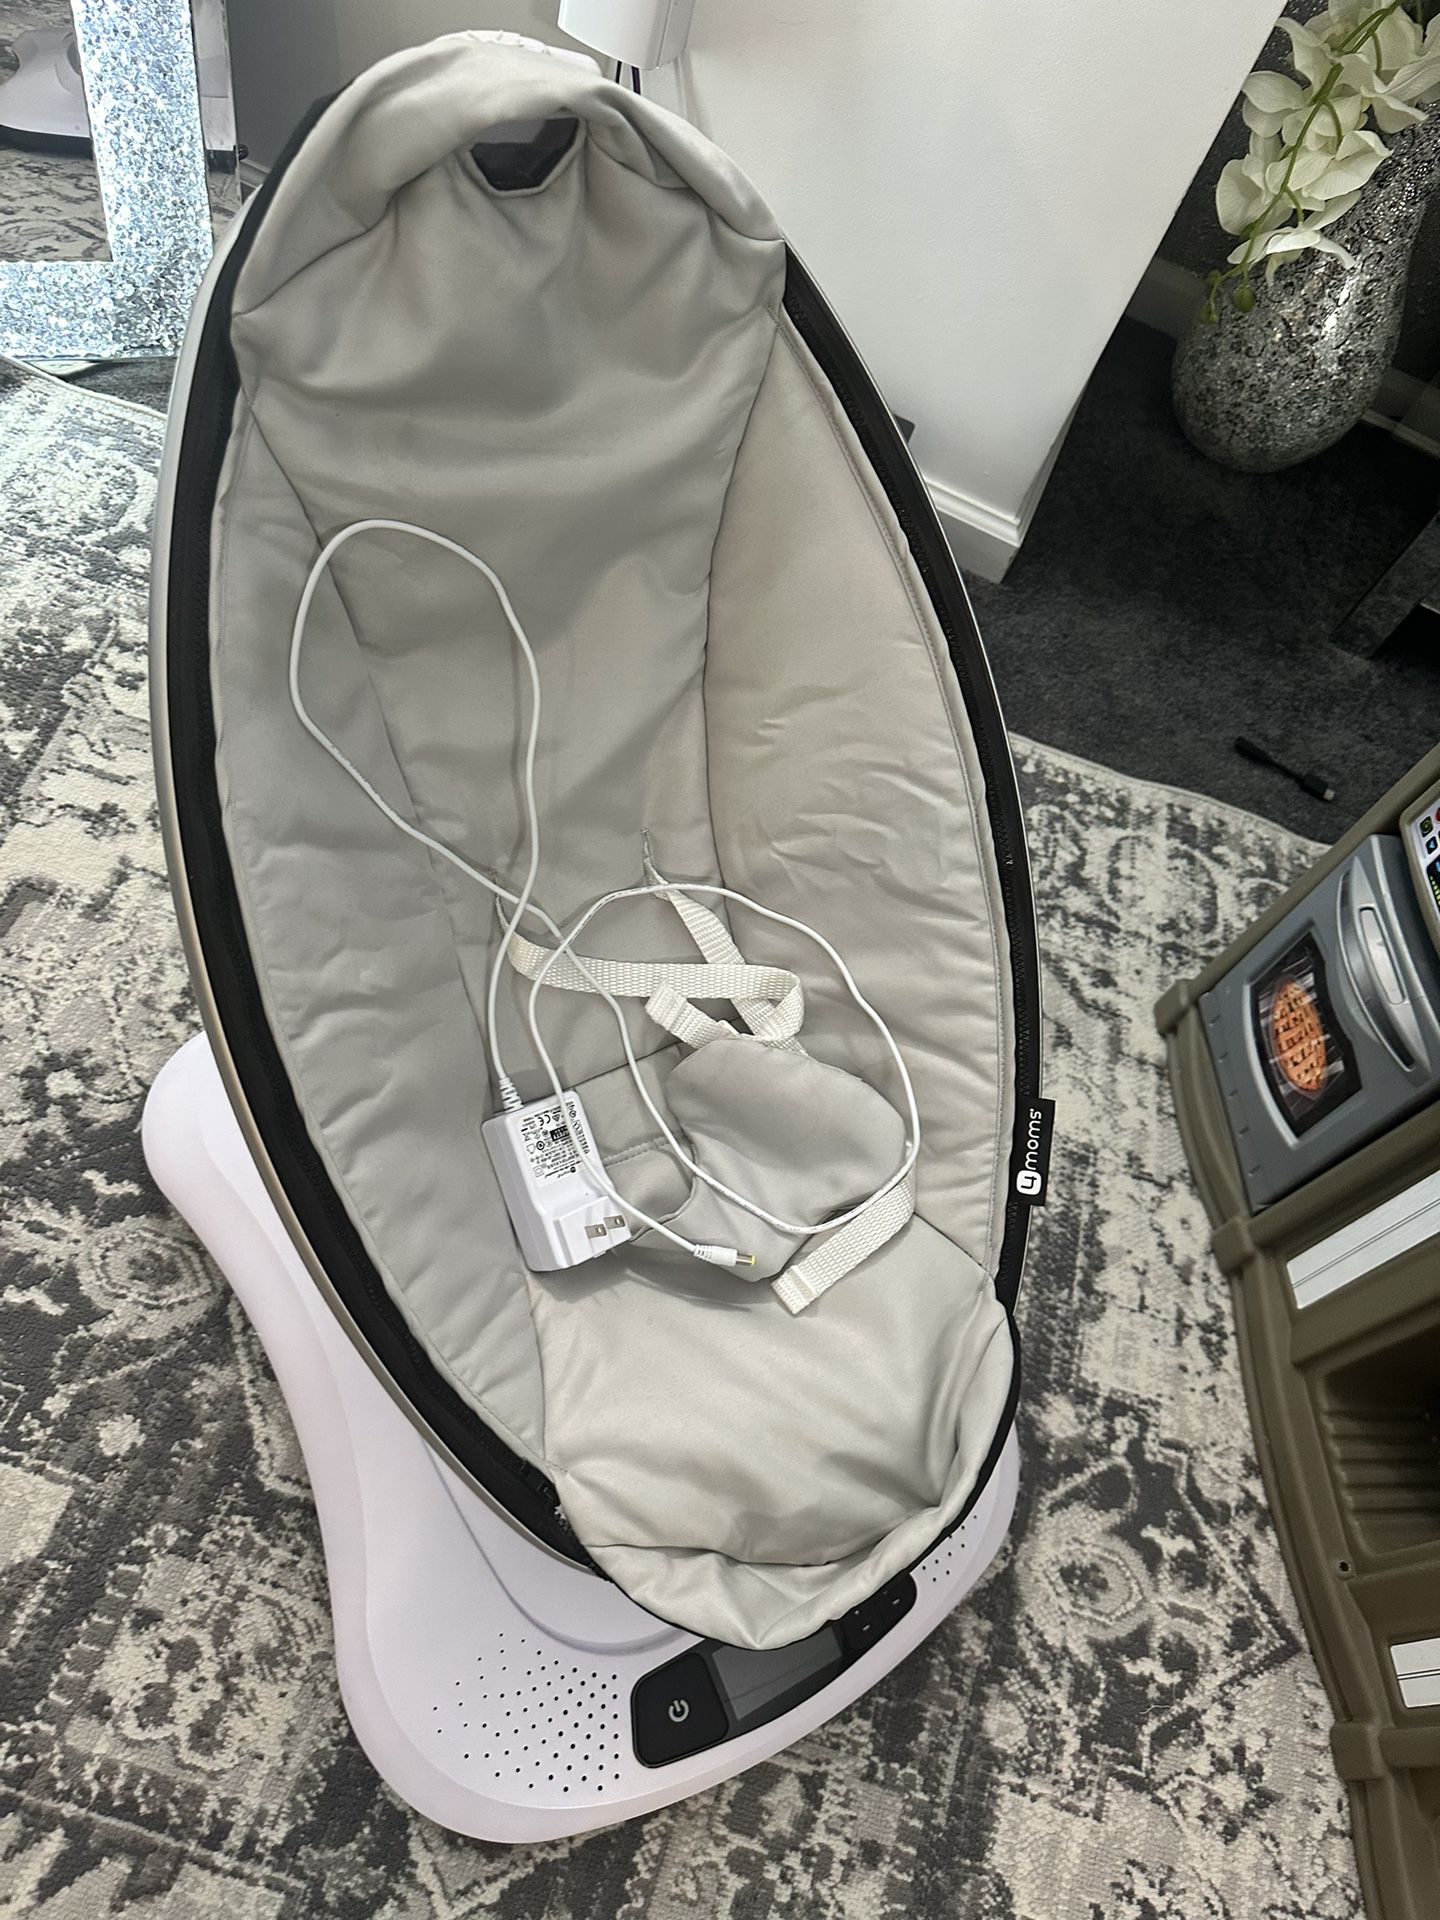 4moms MamaRoo Multi-Motion Baby Swing, Bluetooth Enabled